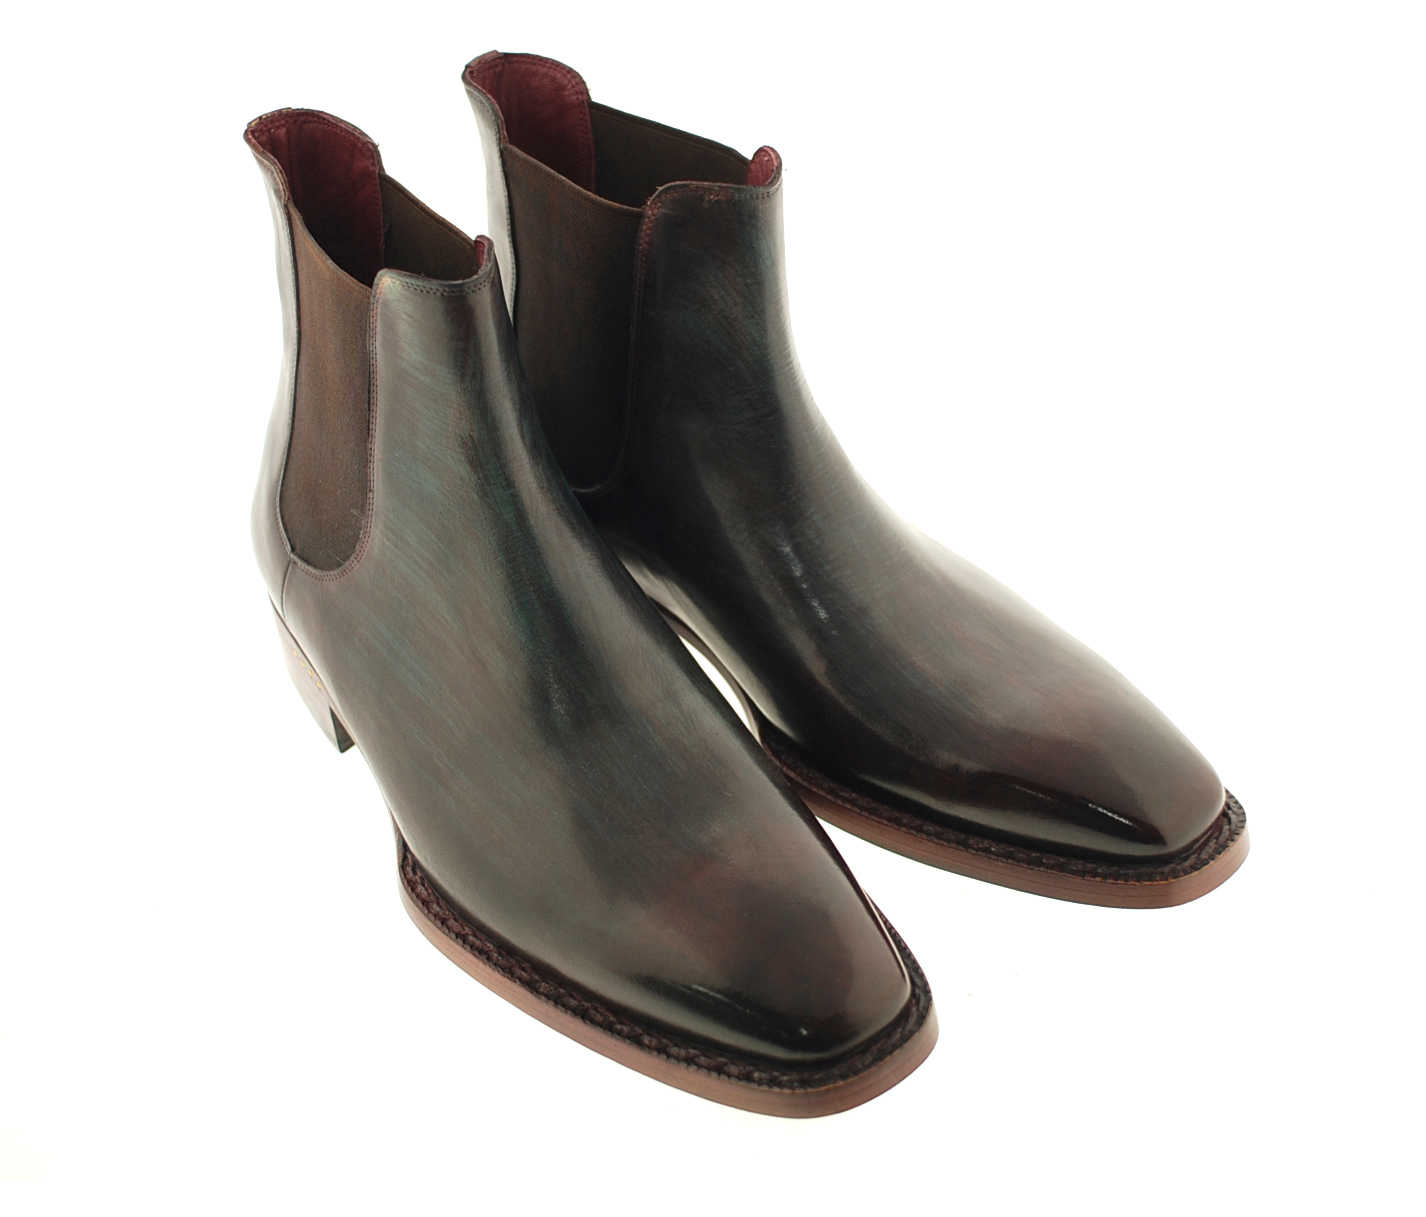 Classic Chelsea Handmade Boots (Aaron) Goodyear Welted Double Sole Chelsea